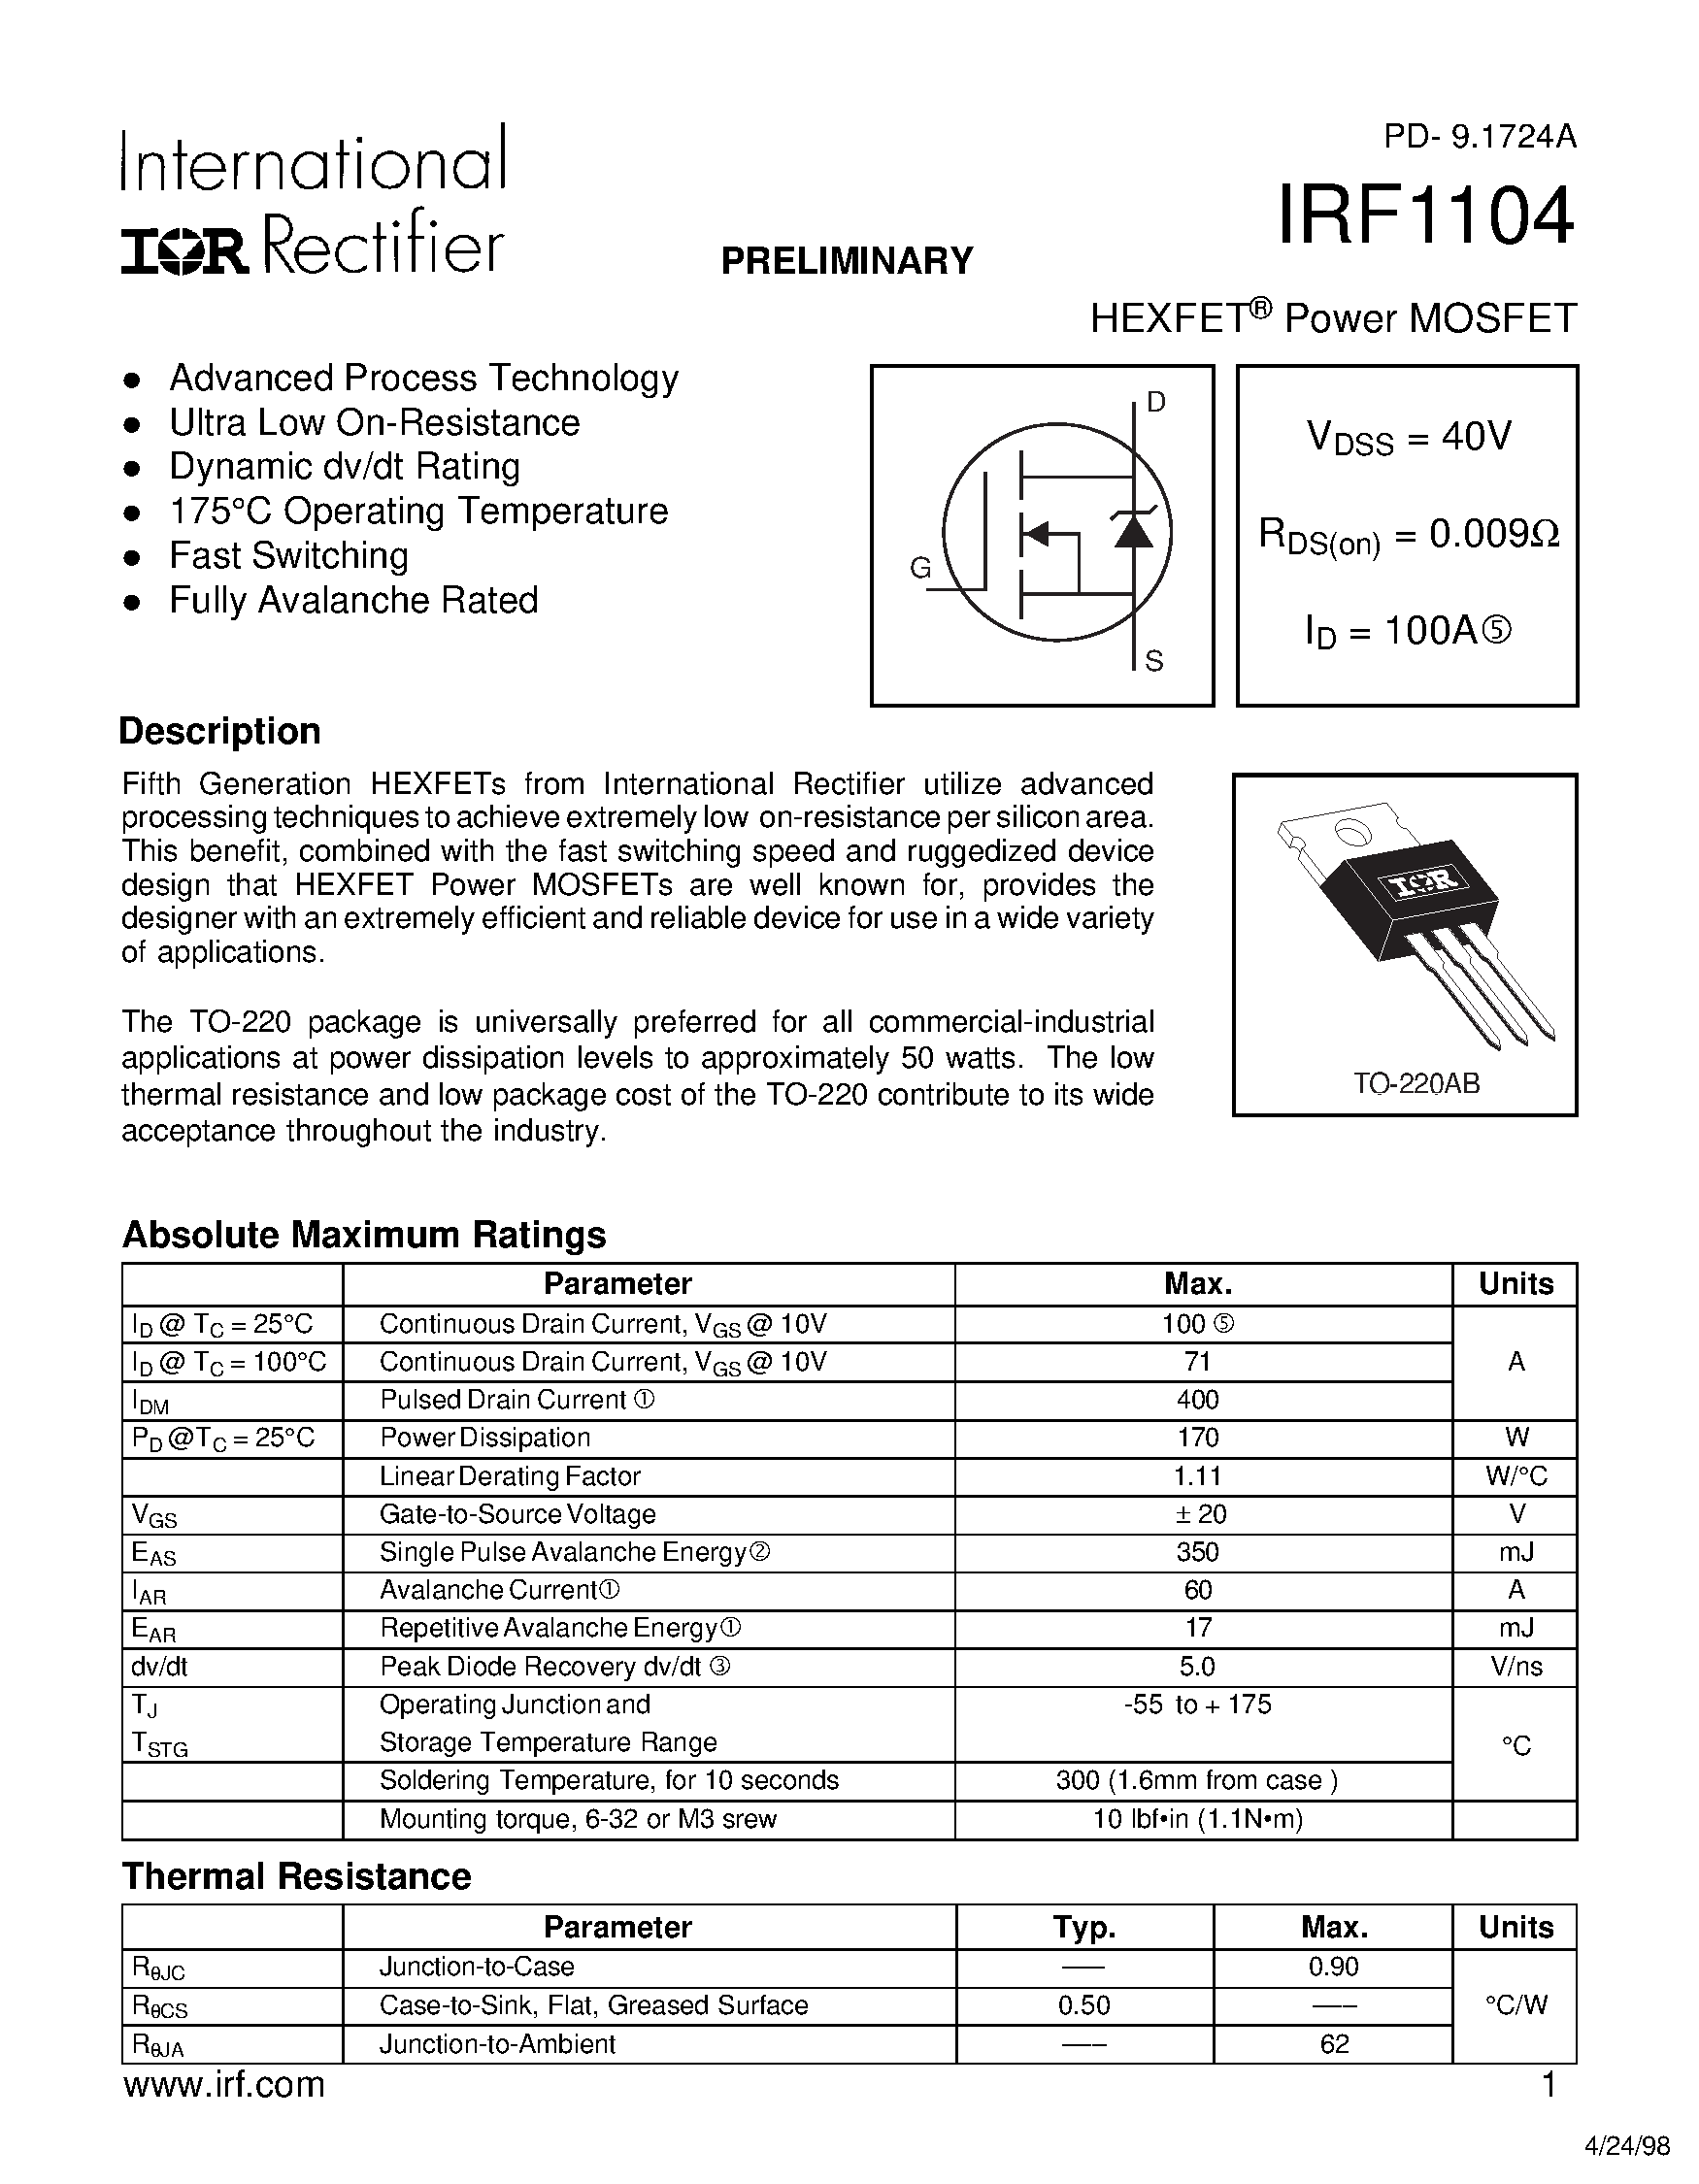 Datasheet IRF1104 - Power MOSFET(Vdss=40V/ Rds(on)=0.009ohm/ Id=100A) page 1